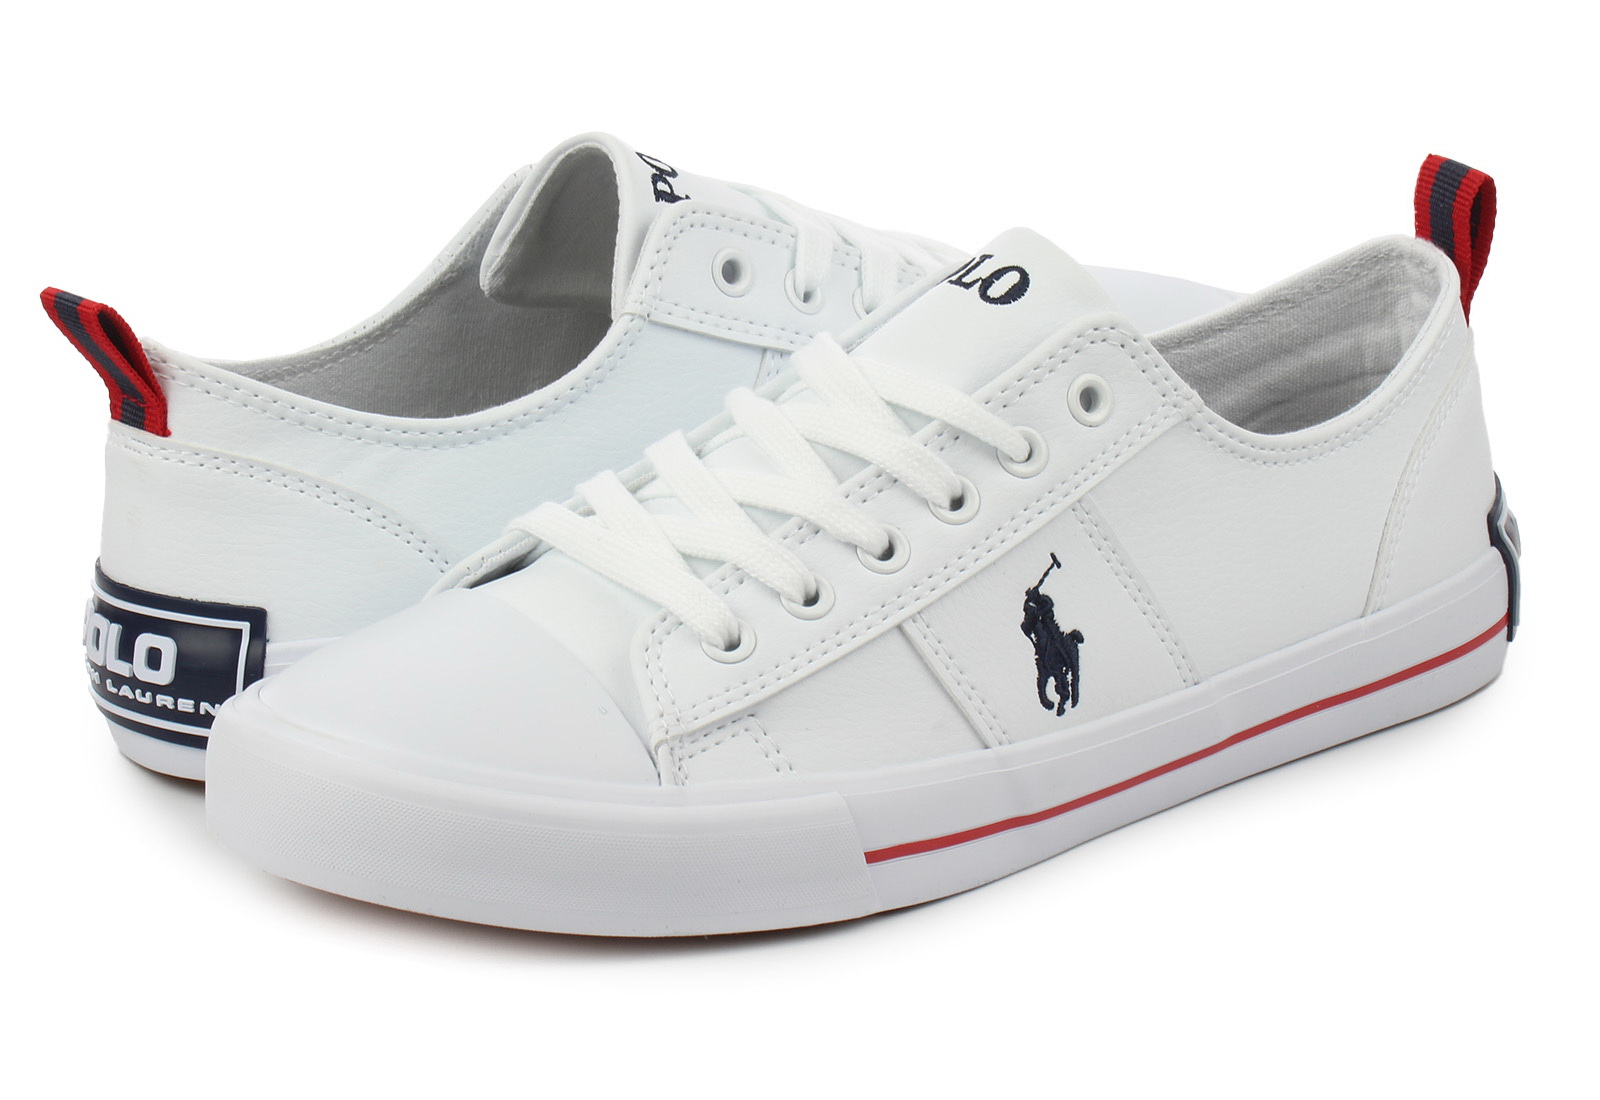 more and more Typical rape Polo Ralph Lauren Sneakers - Davy - RF102999-J - Office Shoes Romania